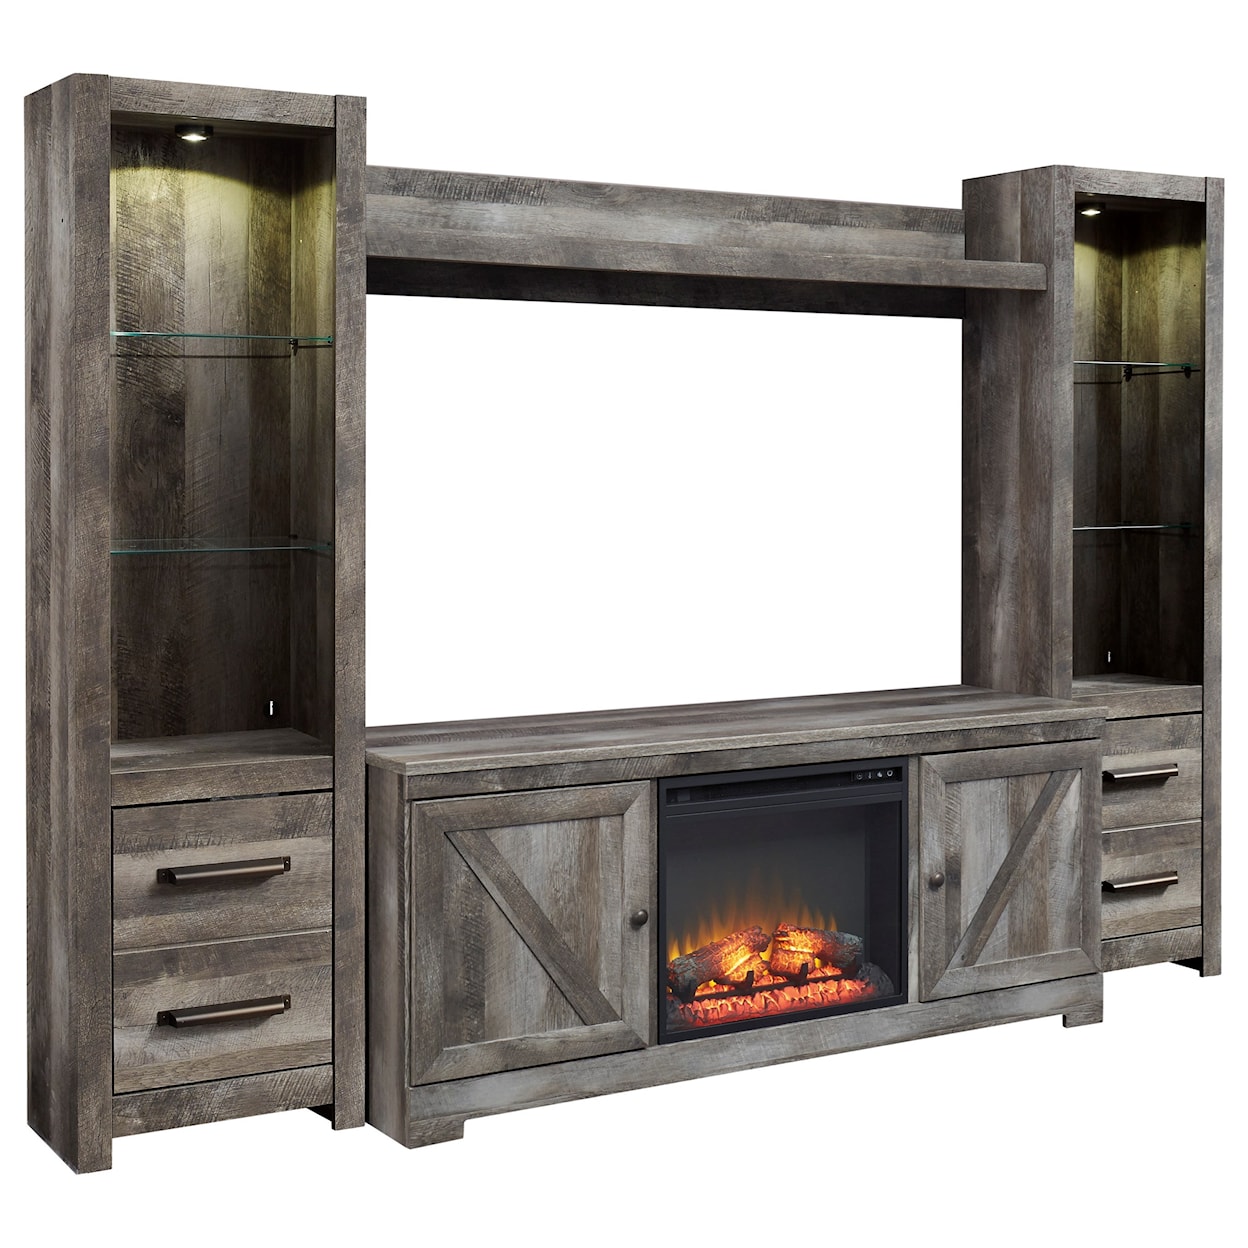 Signature Design by Ashley Wynnlow Wall Unit with Fireplace